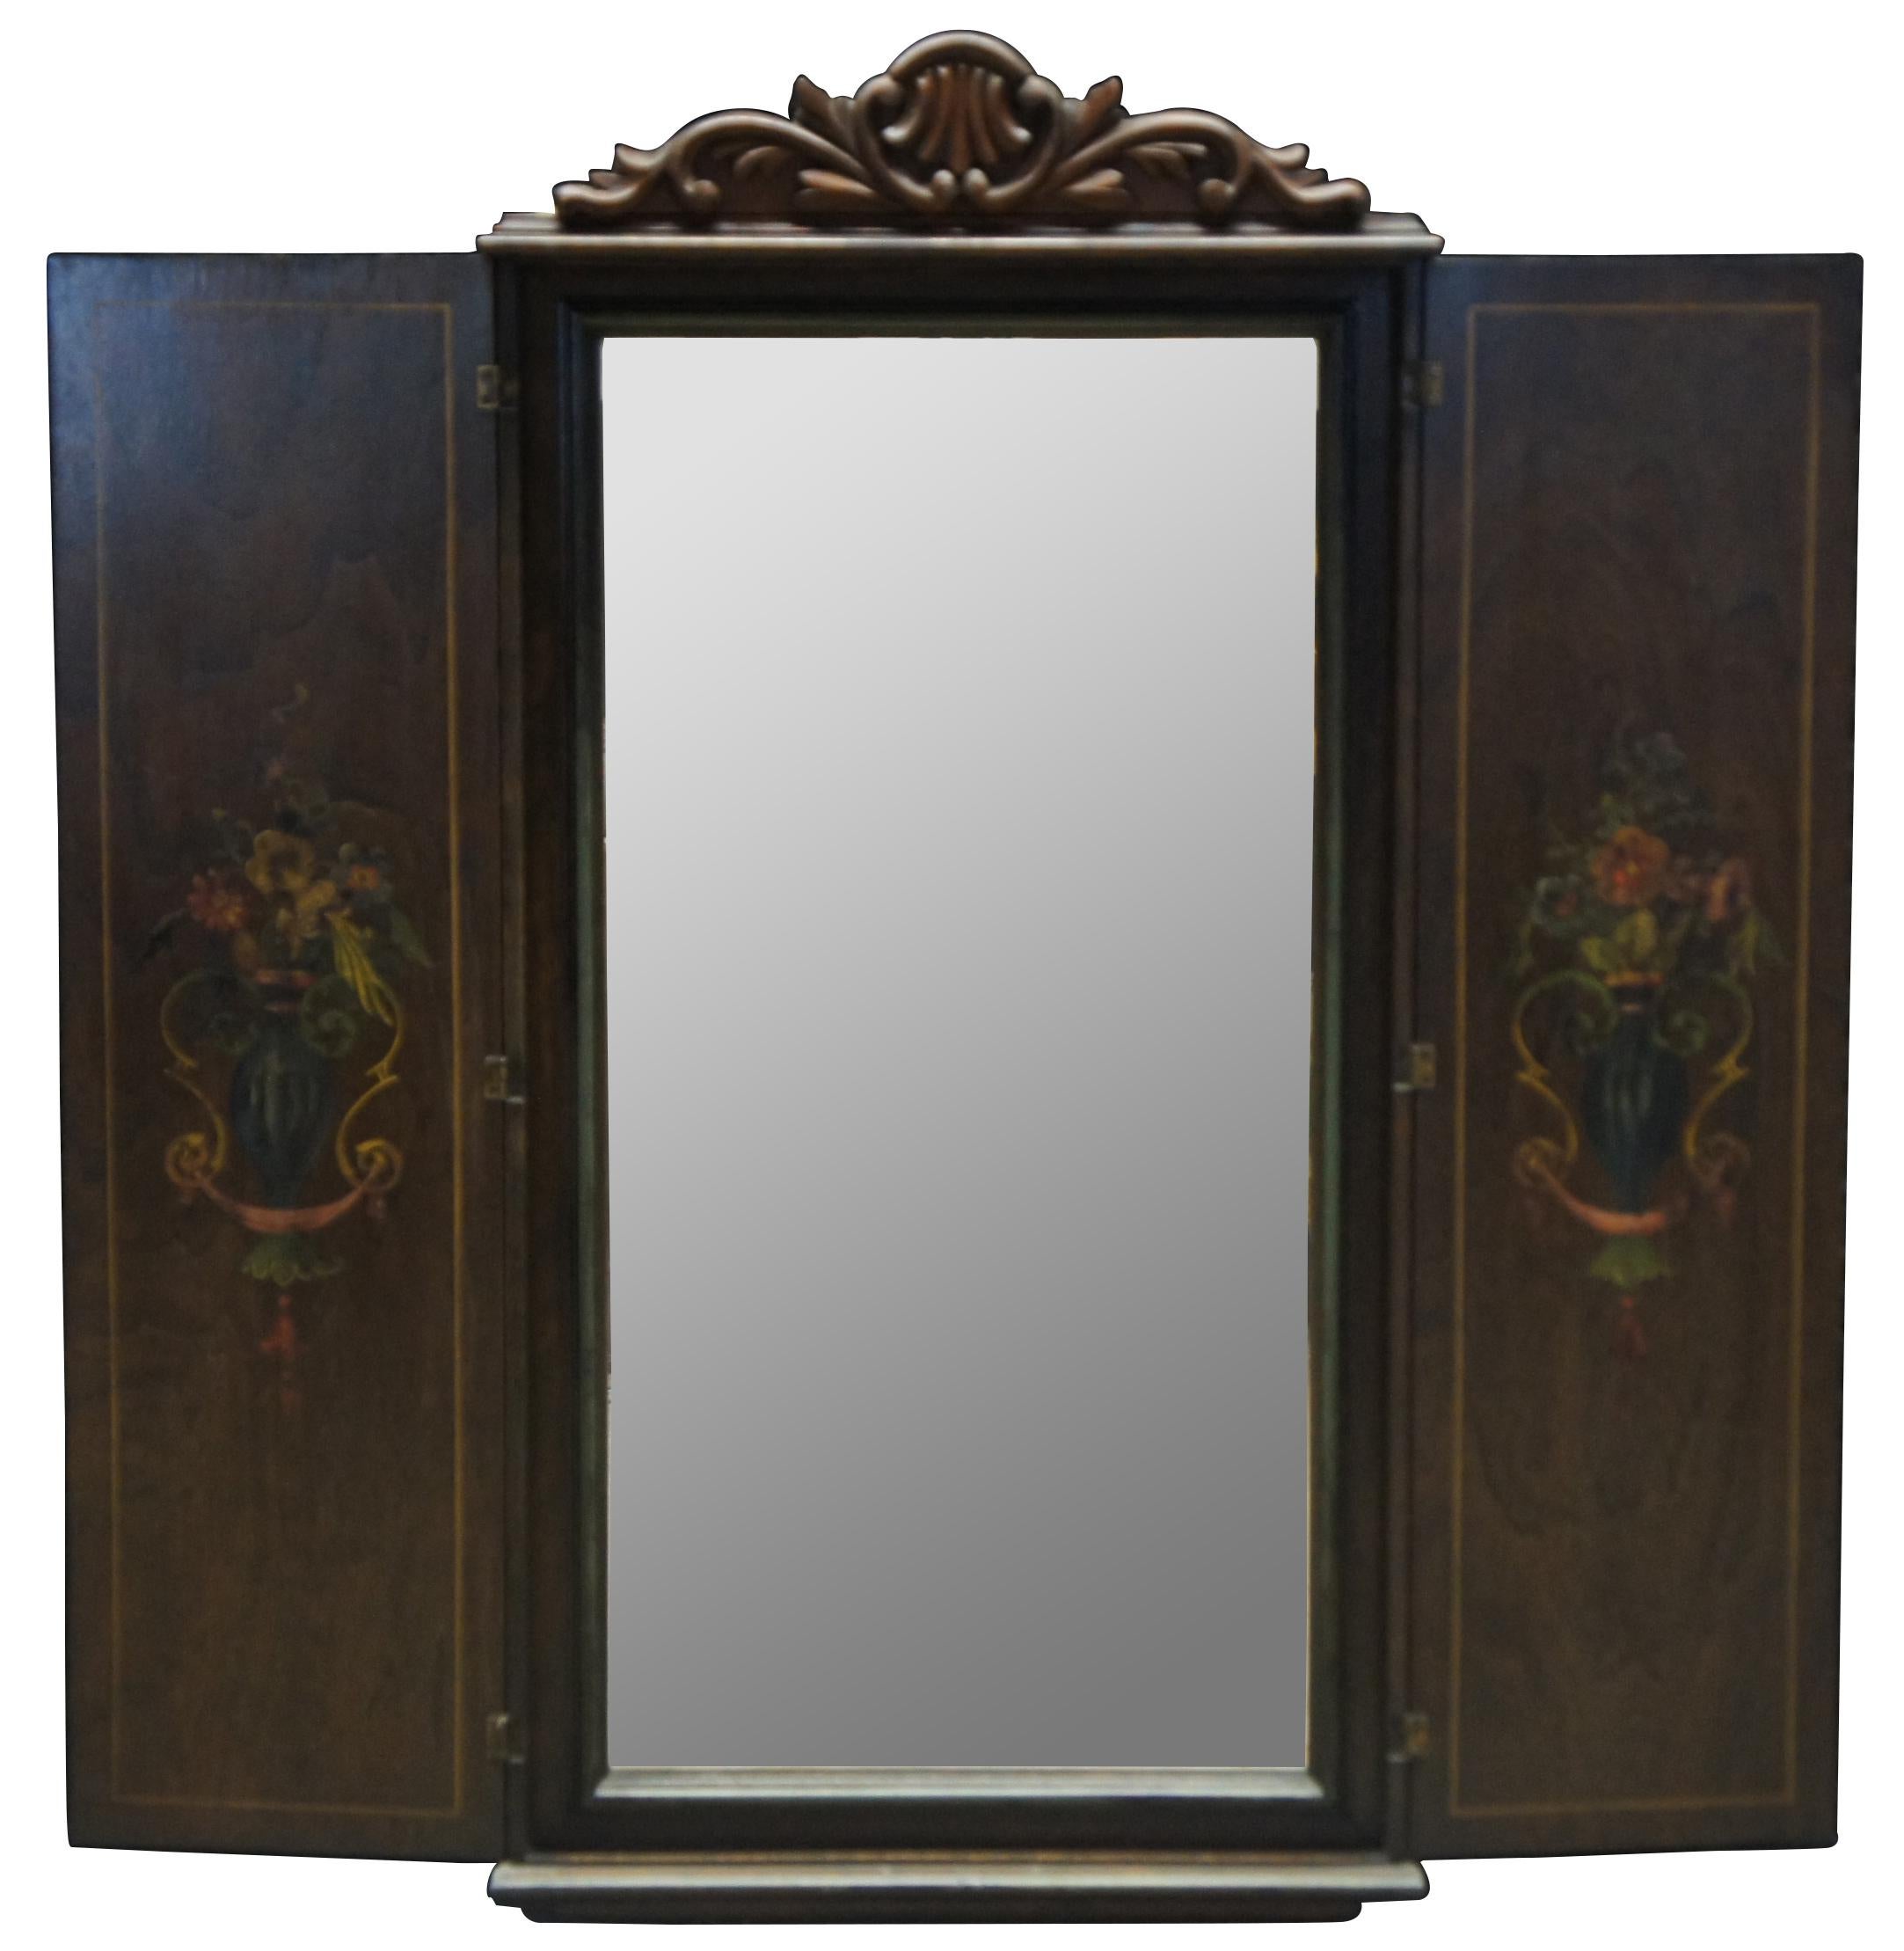 Antique wall hanging wood cabinet with stenciled floral border. The two doors open to reveal a rectangular mirror flanked by painted neoclassical vases of flowers.

Measures: 17.75” x 2.25” x 36” / Mirror - 13.5” x 27.5” / Width Open – 34.25”